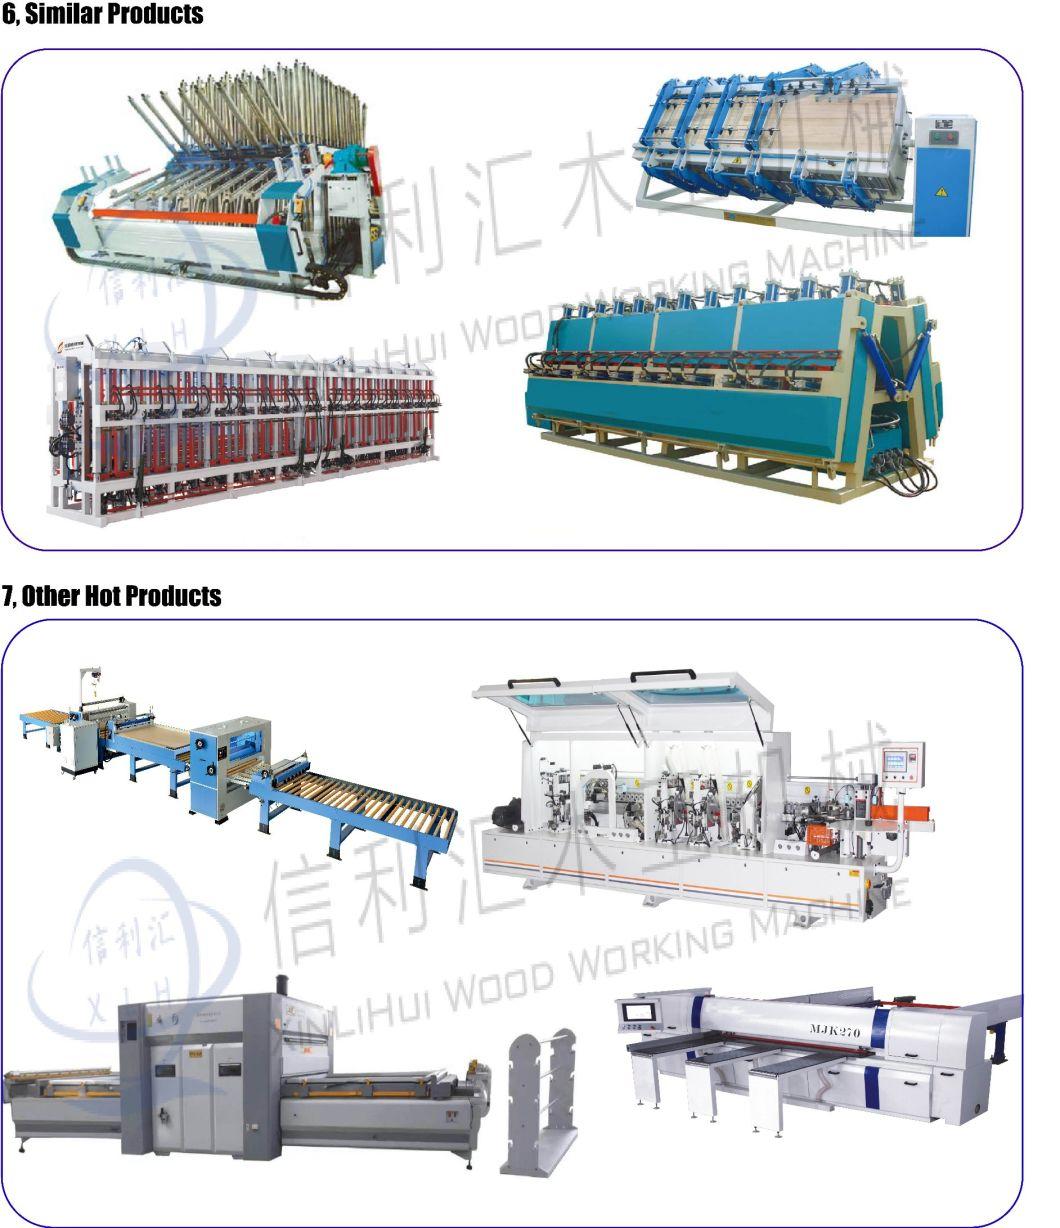 High-Frequency Wood Board Jointing Machine Edge Glue Laminating Machine for Board/ Multi Layer Wood Board Jointing Machine